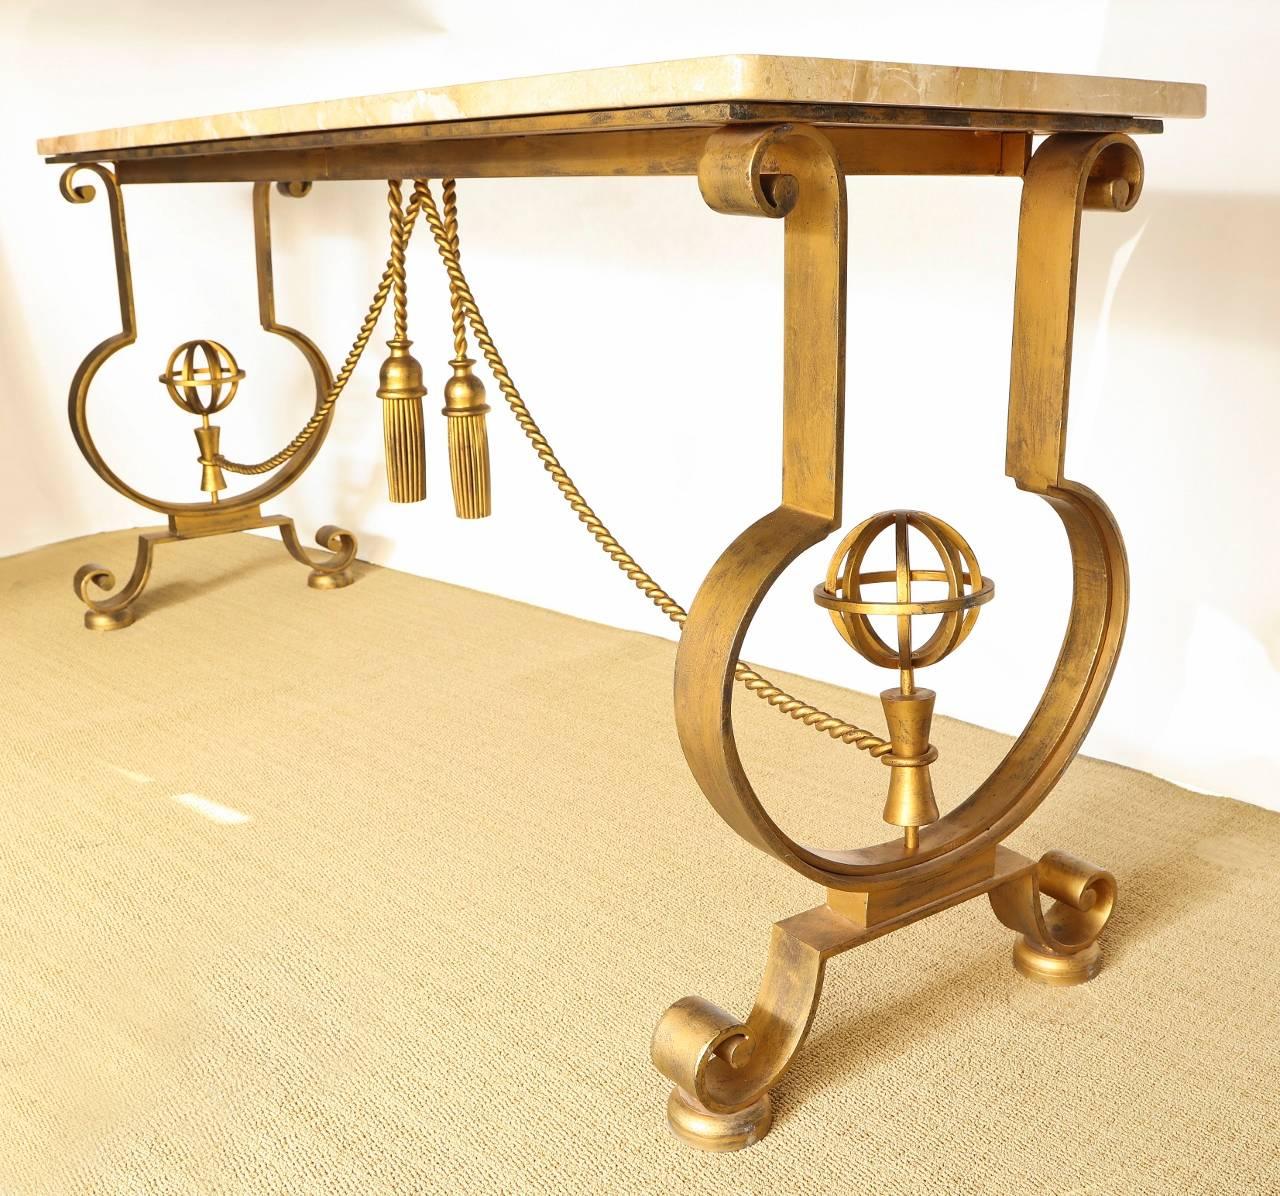 A French forged iron gilt console in the manner of Gilbert Poillerat. The marble-top table has a support at either end with open work design featuring armolary sphere above splayed legs, the ends joined by stretcher in the form of draped rope with